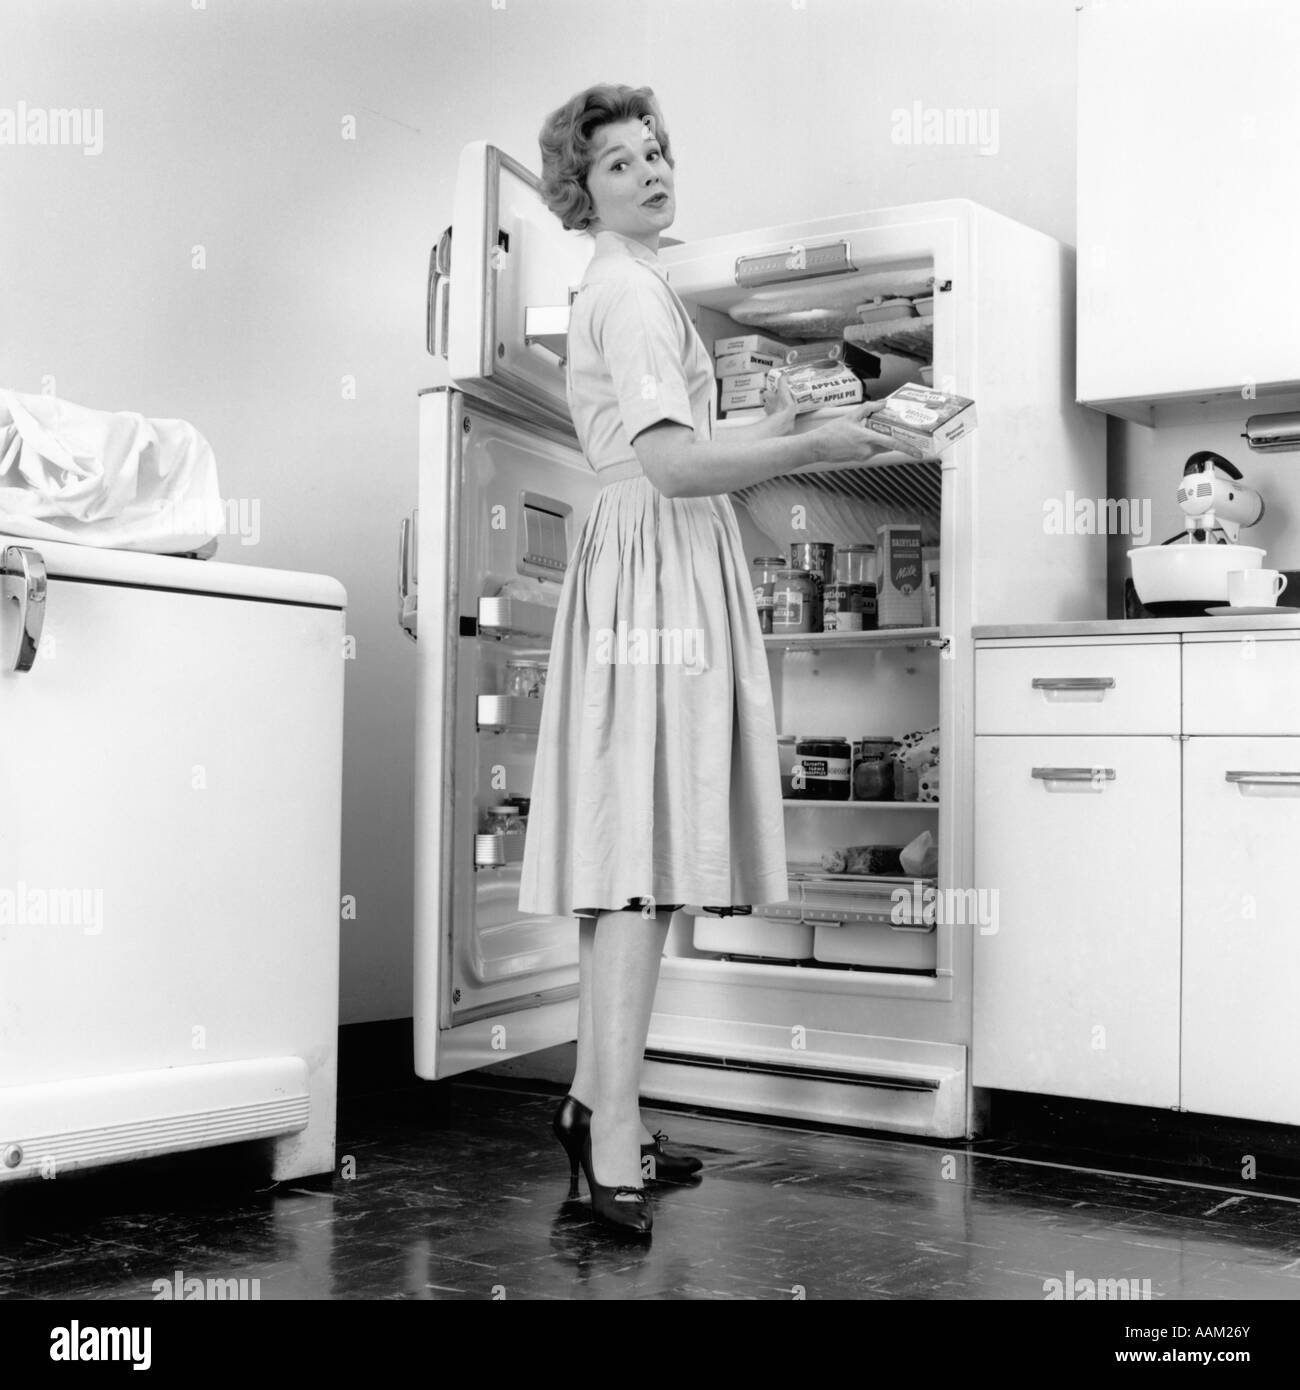 1950s WOMAN STANDING IN KITCHEN BY OPEN REFRIGERATOR Stock ...